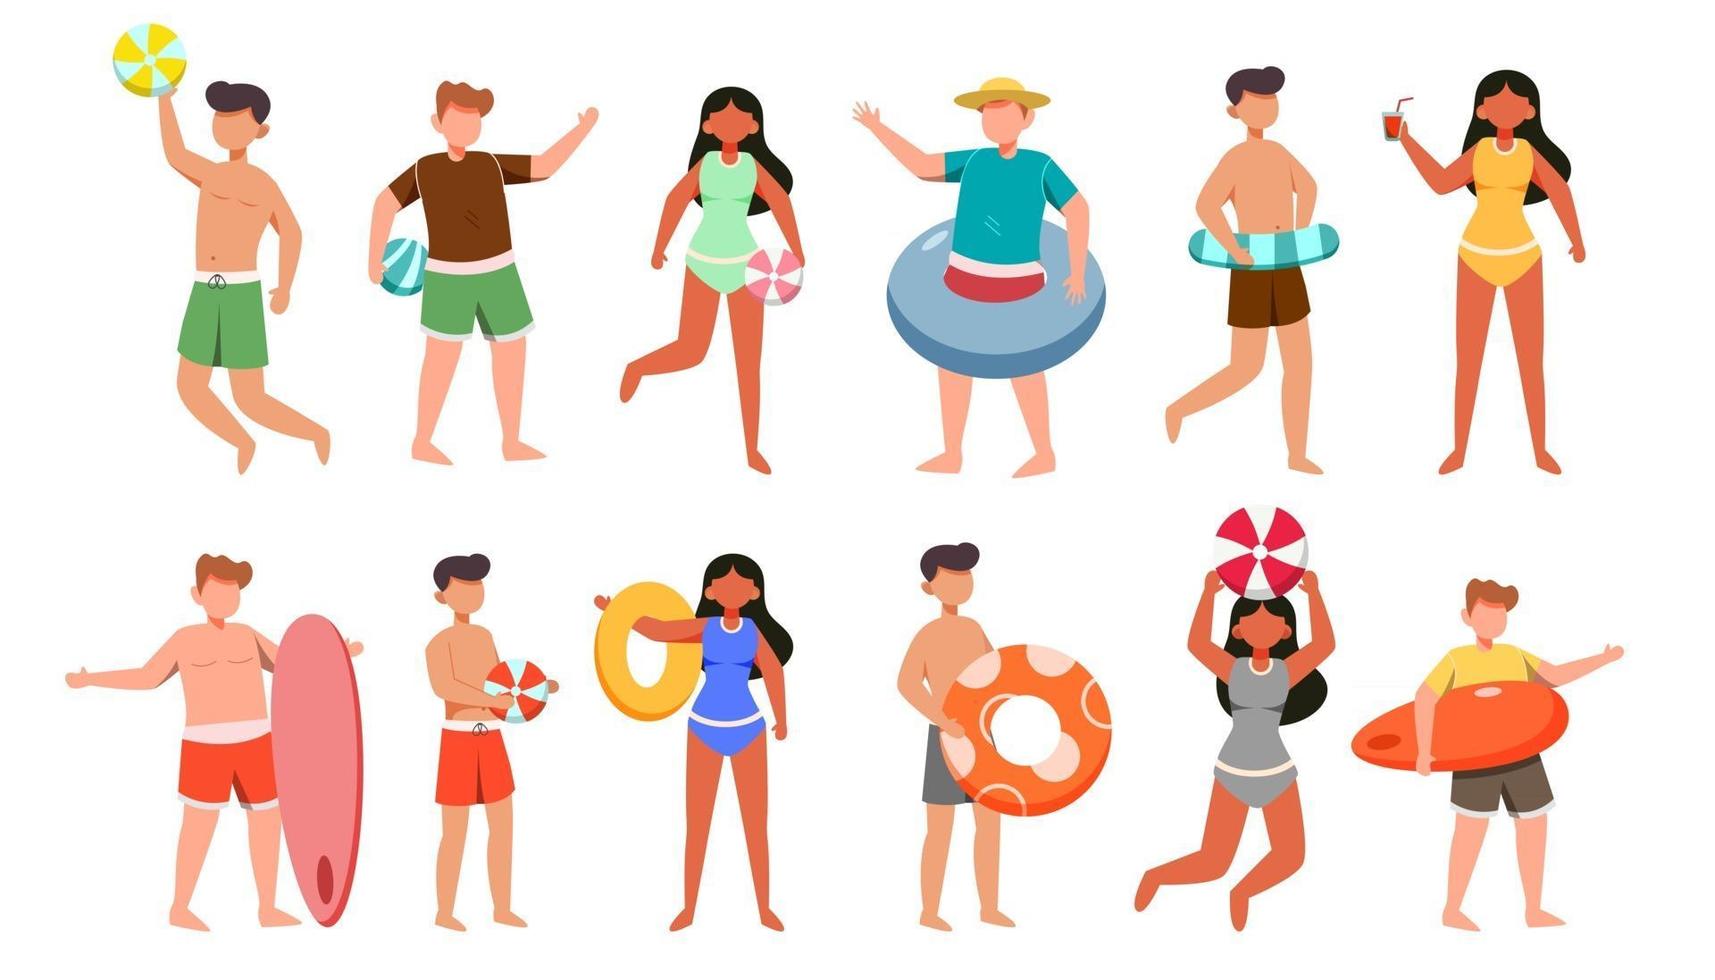 Bundle of man and woman character 4 sets, 12 poses of female in swimming suit with gear vector